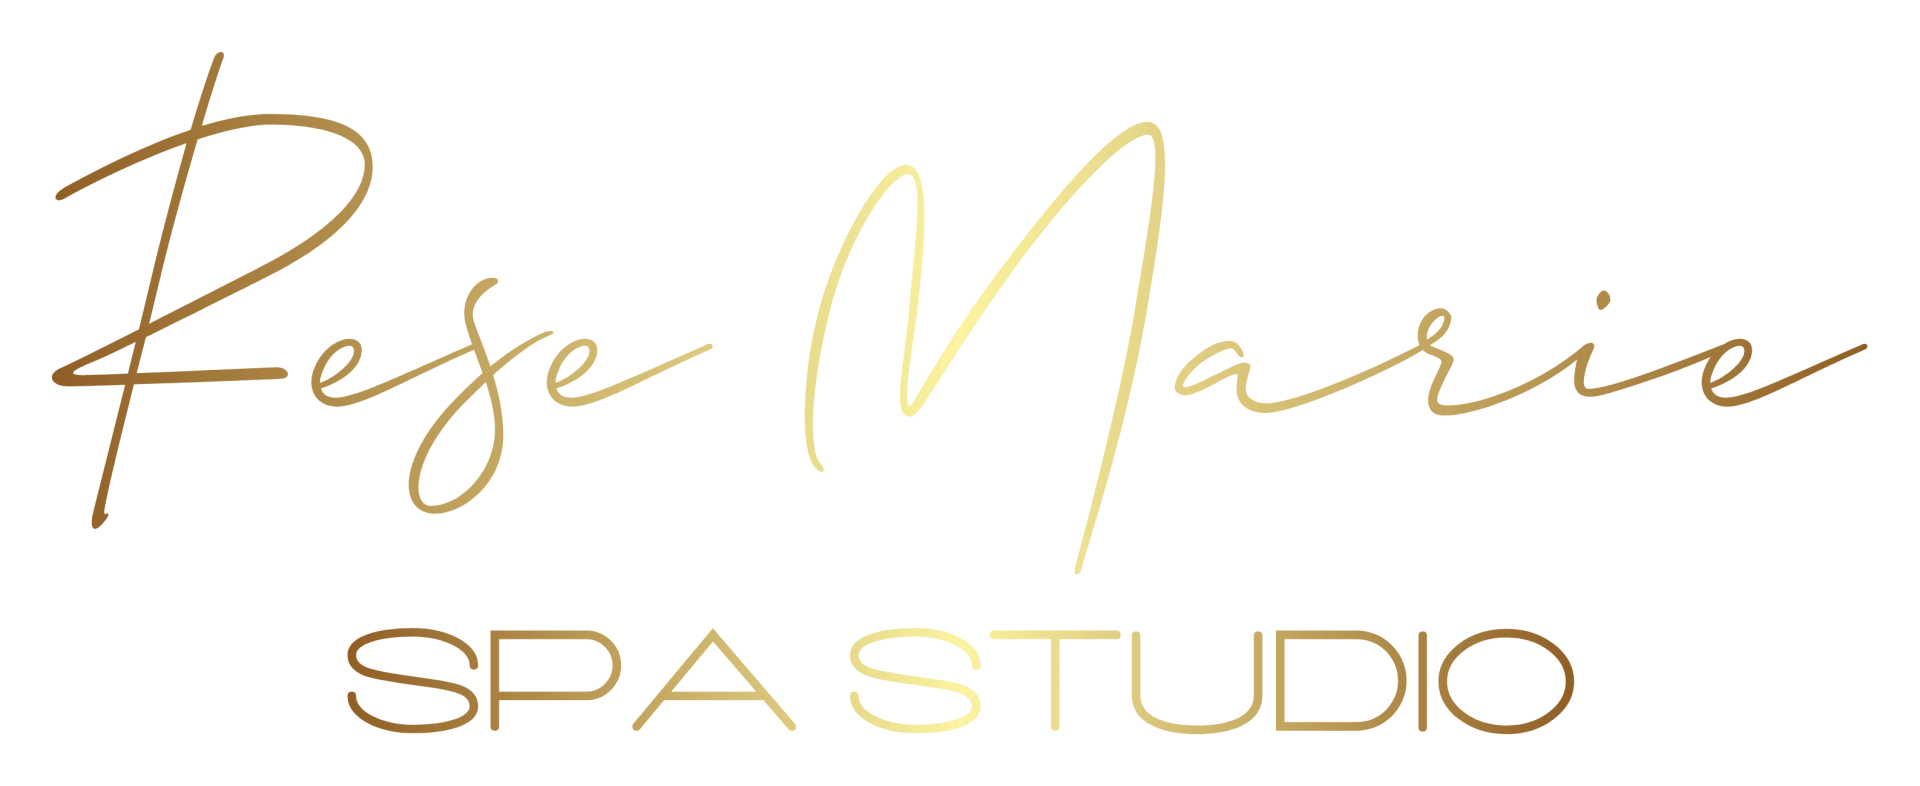 it is a logo for a spa studio .